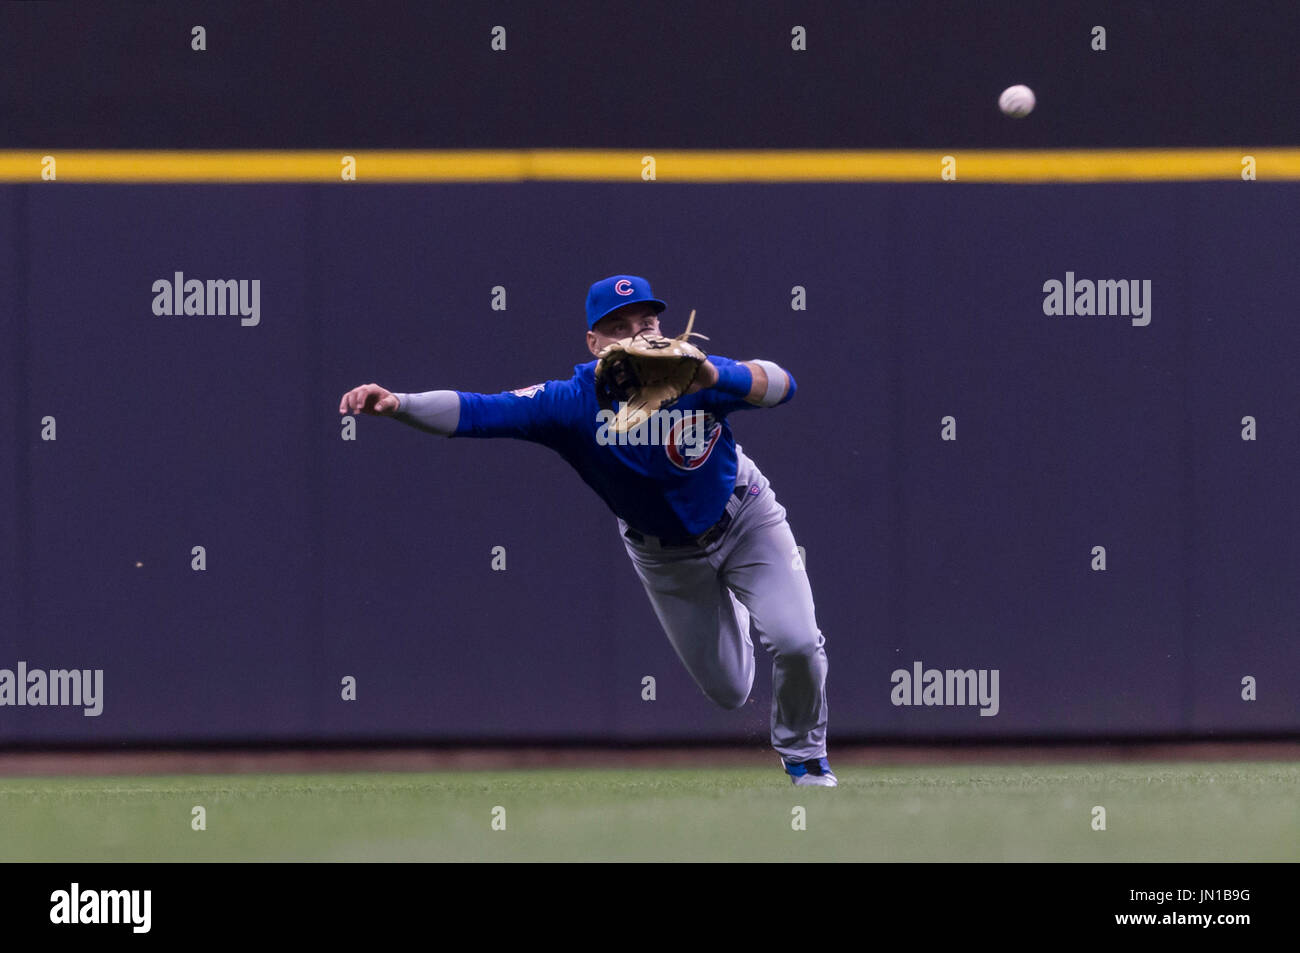 Milwaukee, WI, USA. 28th July, 2017. Chicago Cubs center fielder Albert Almora Jr. #5 makes a diving catch in the Major League Baseball game between the Milwaukee Brewers and the Chicago Cubs at Miller Park in Milwaukee, WI. John Fisher/CSM/Alamy Live News Stock Photo